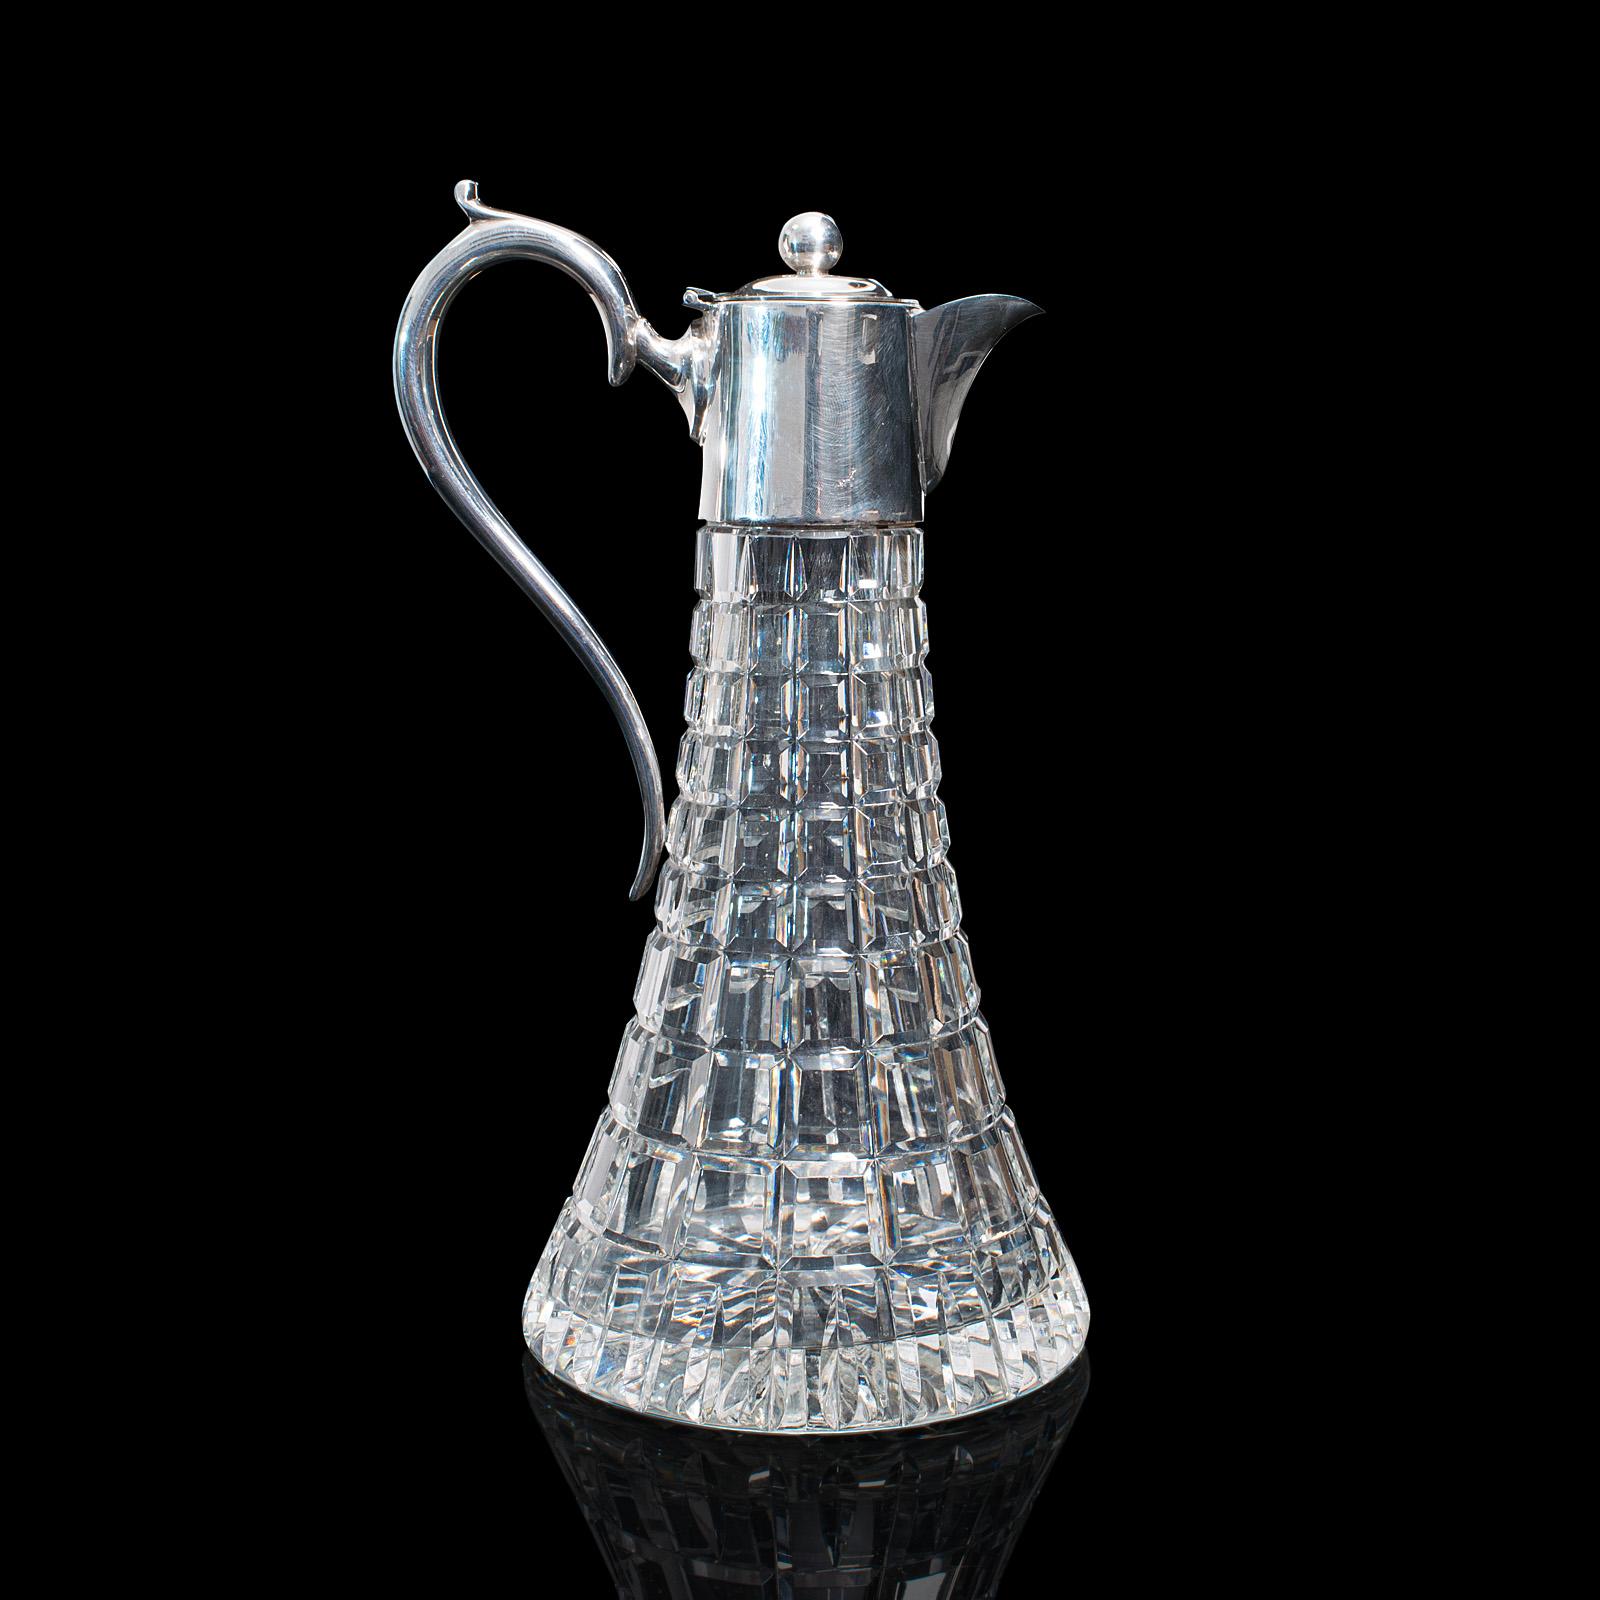 This is a vintage claret jug. An English, cut glass wine or spirit decanter, dating to the late 20th century, circa 1980.

Beautifully cut glass jug with bright appearance
Displays a desirable aged patina and in very good order
Quality square